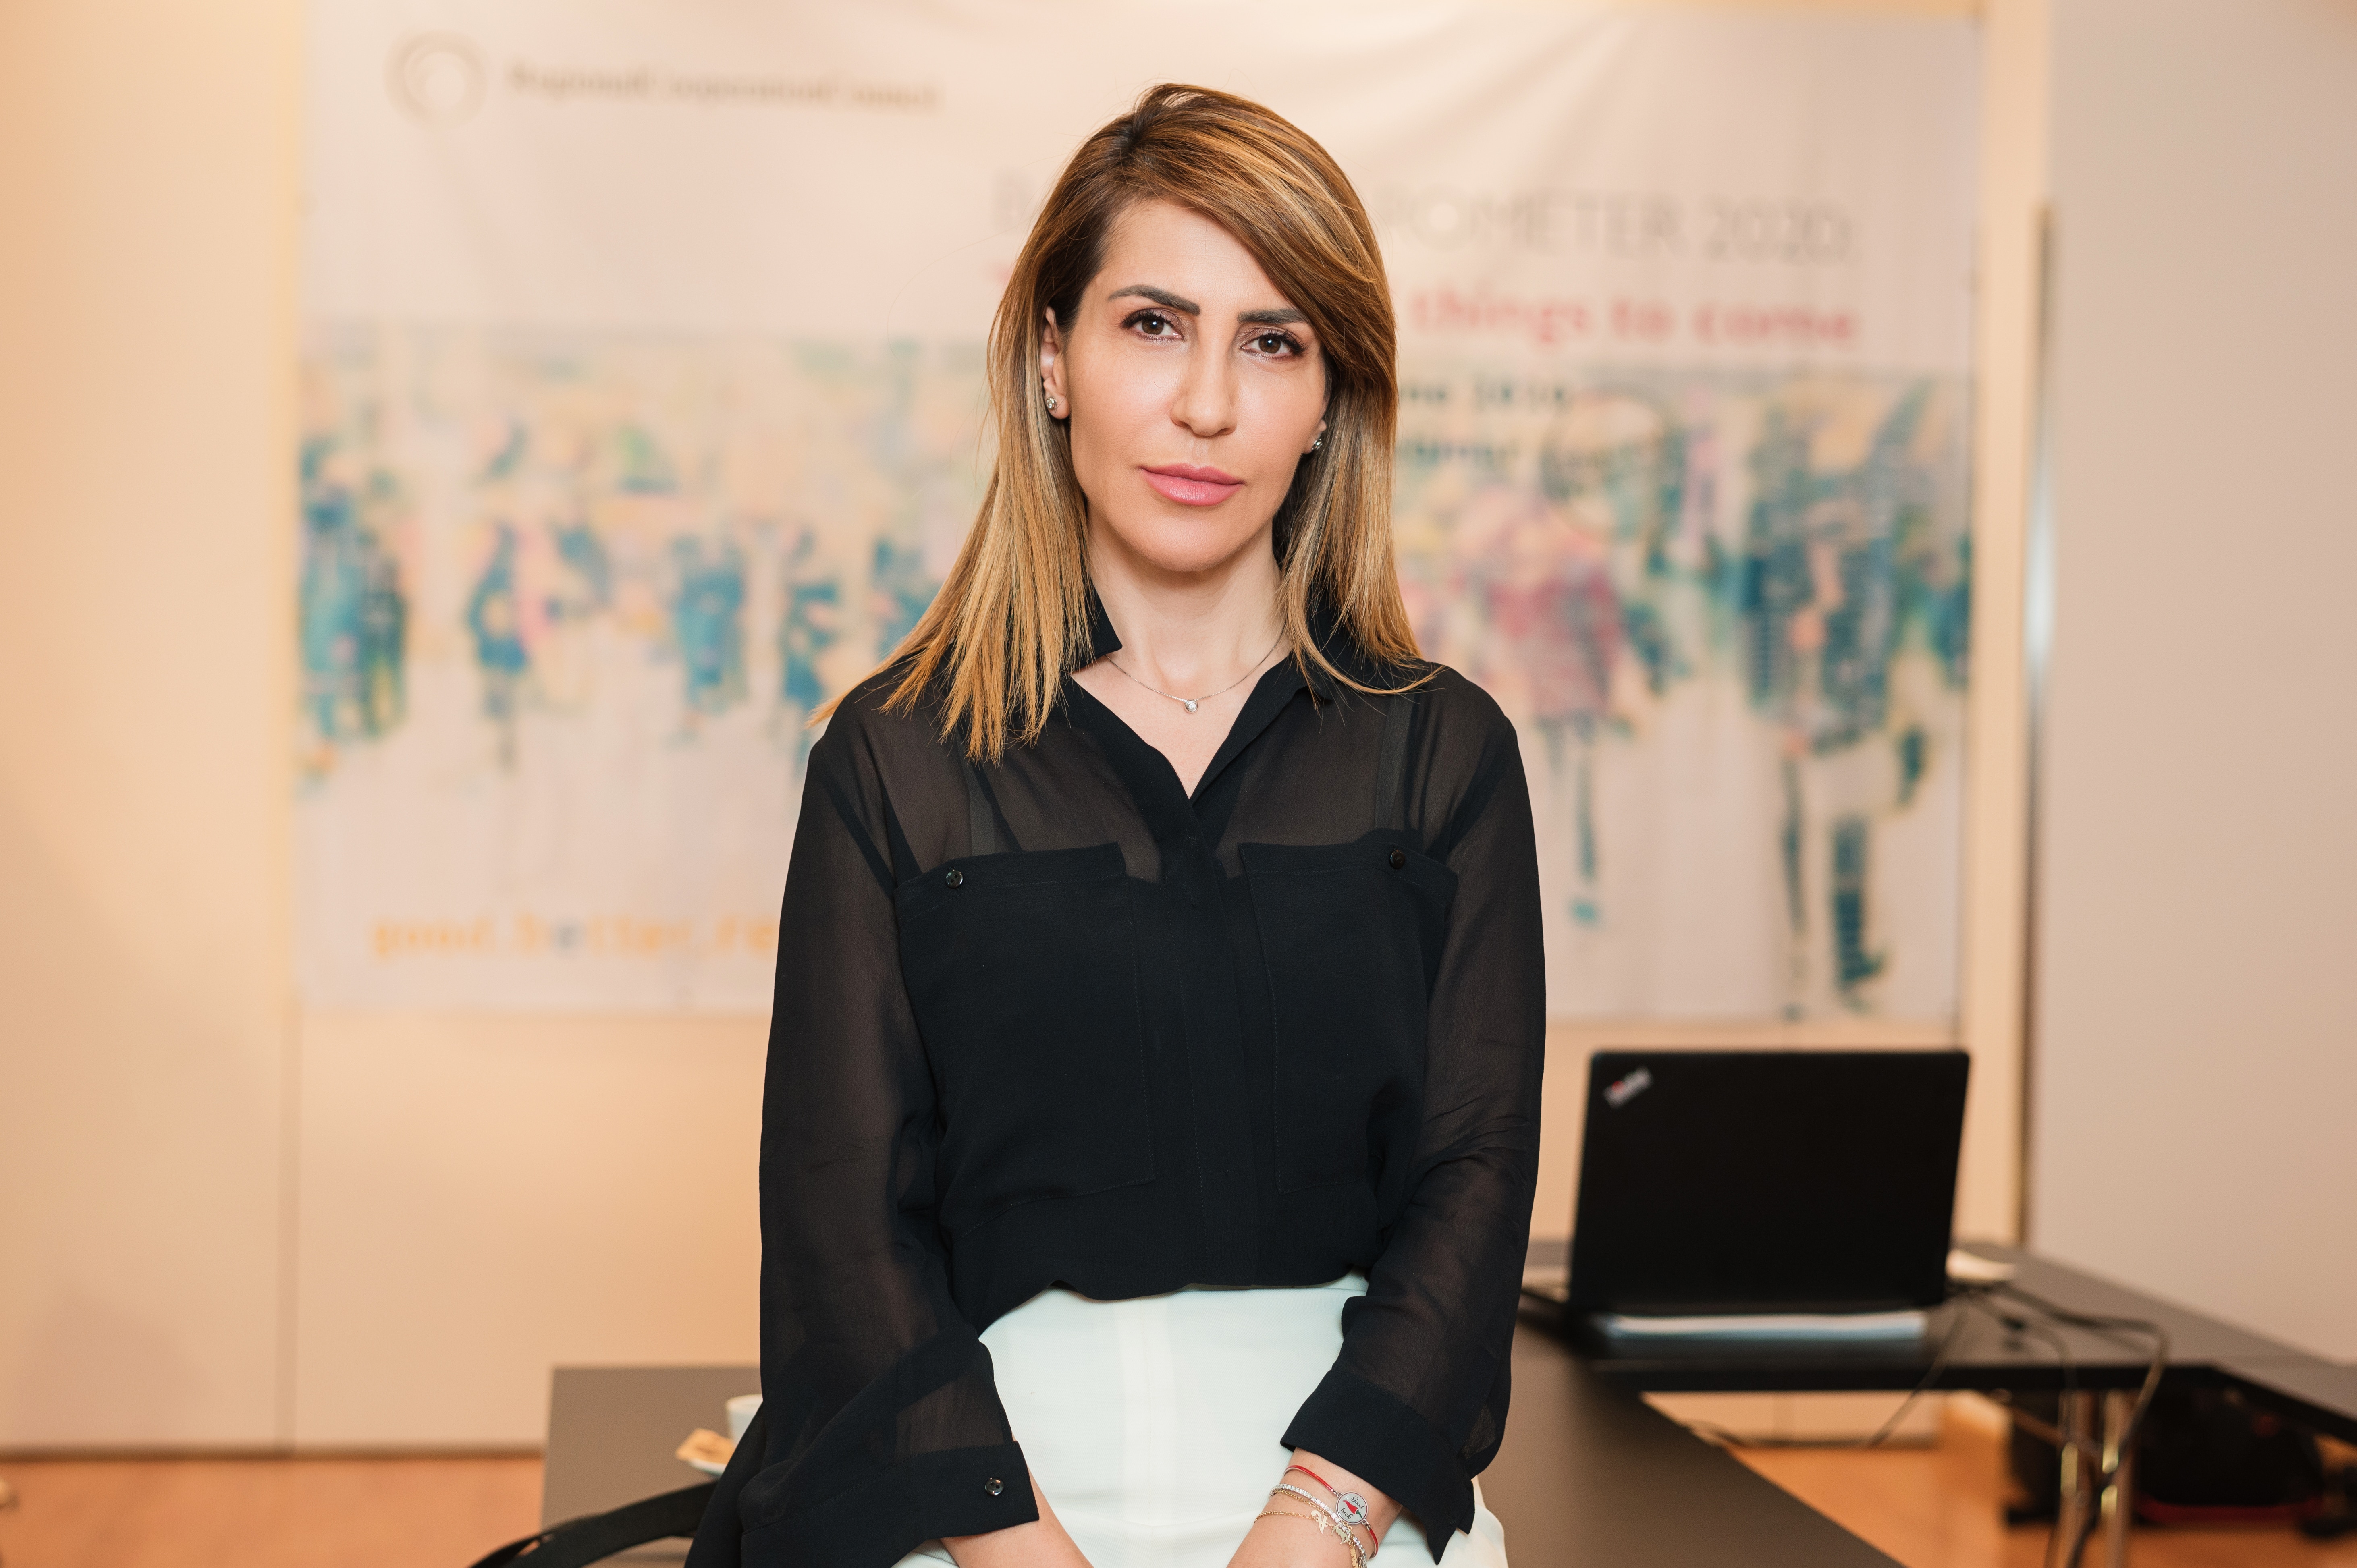 Western Balkans Youth and the Future of Europe; Op-Ed by the Secretary General of the Regional Cooperation Council Majlinda Bregu  